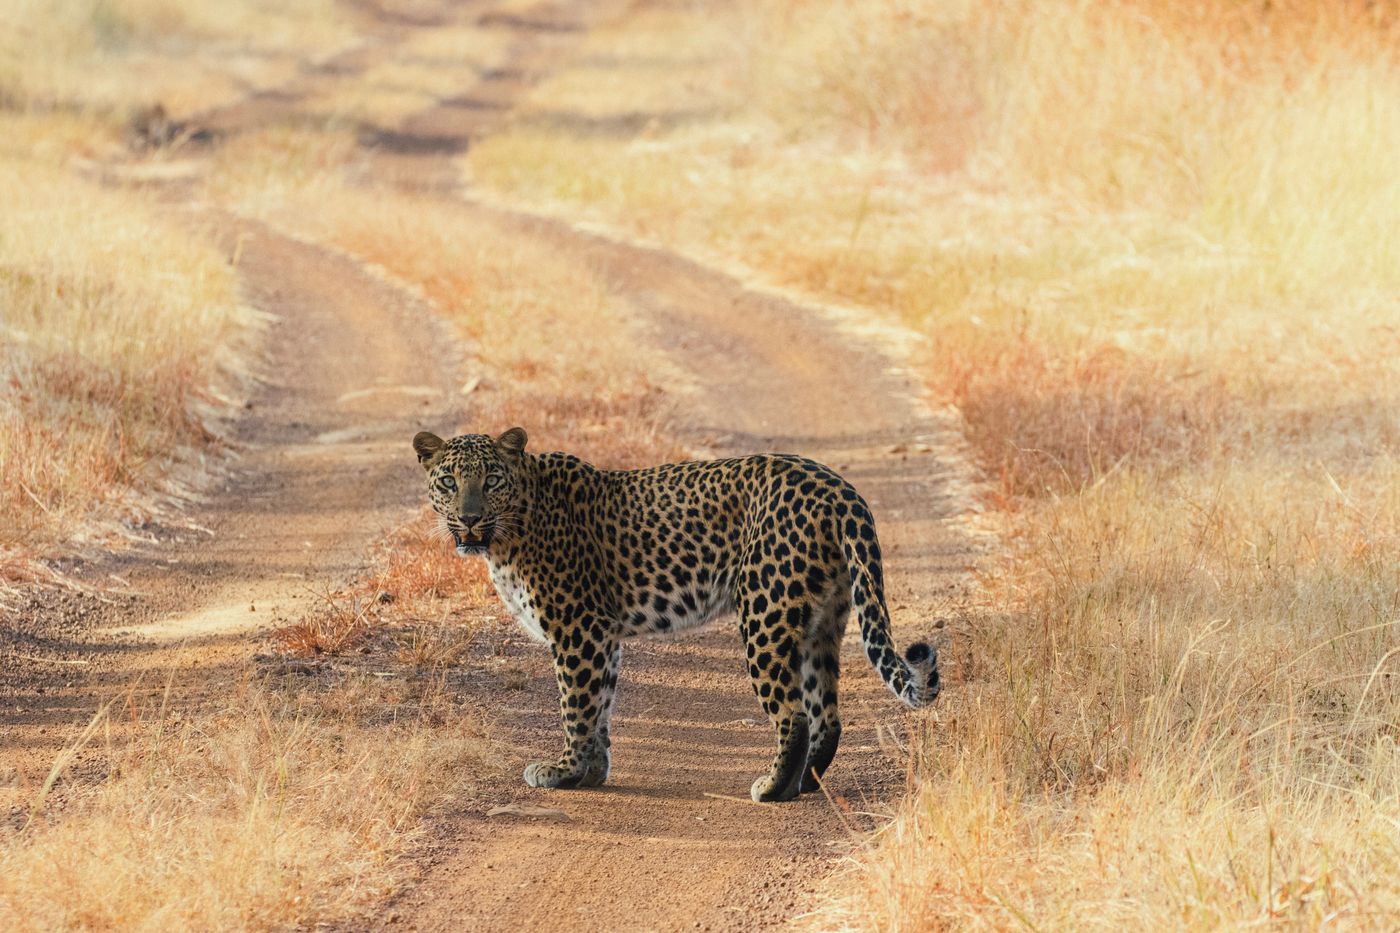 A leopard walking in the road in Panna National Park